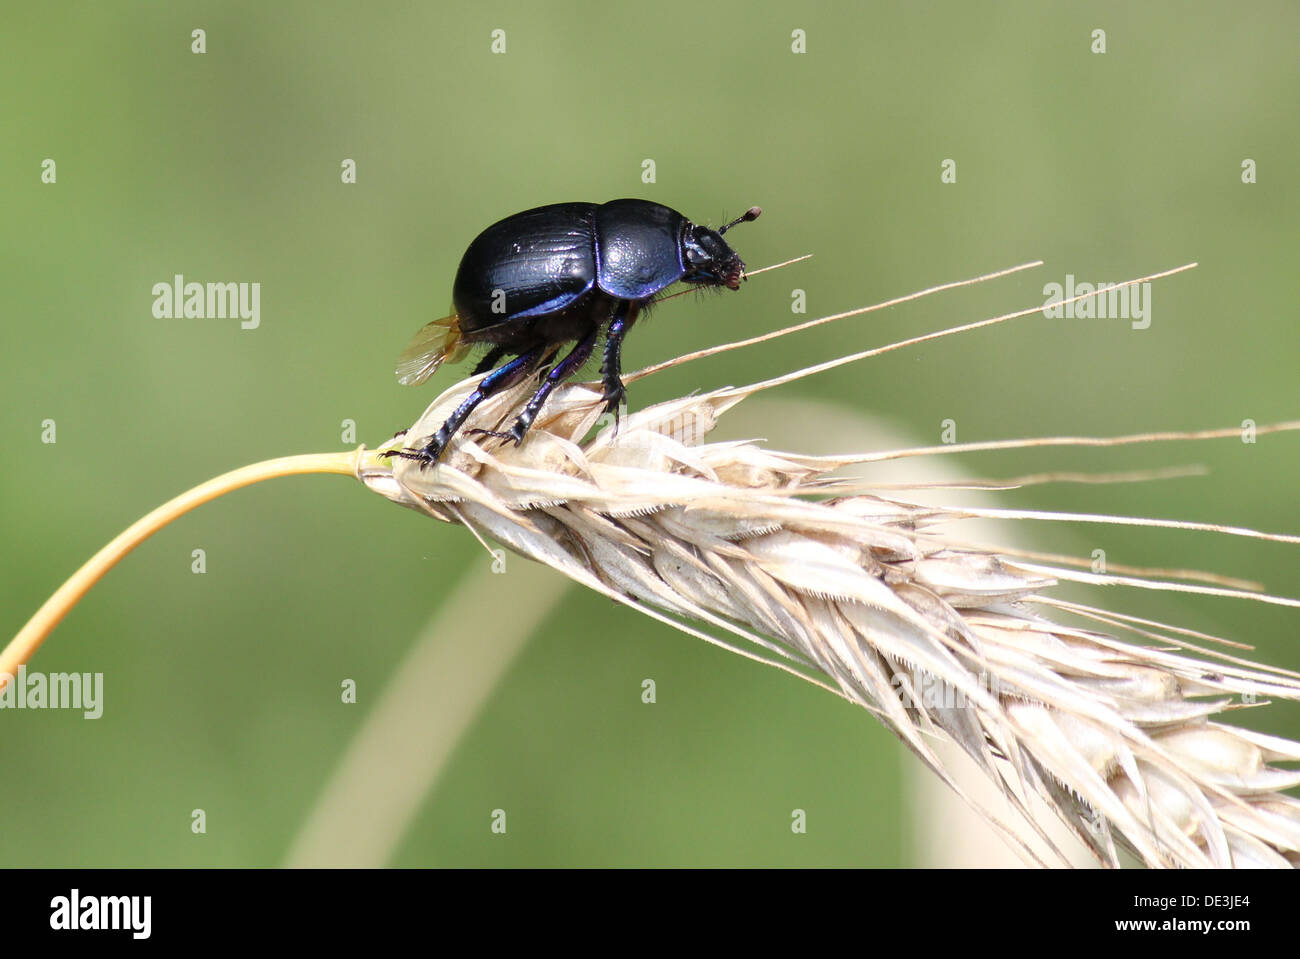 Close-up of the blueish Dor Beetle or Dumbledore (Geotrupes stercorarius) posing on an ear of wheat Stock Photo